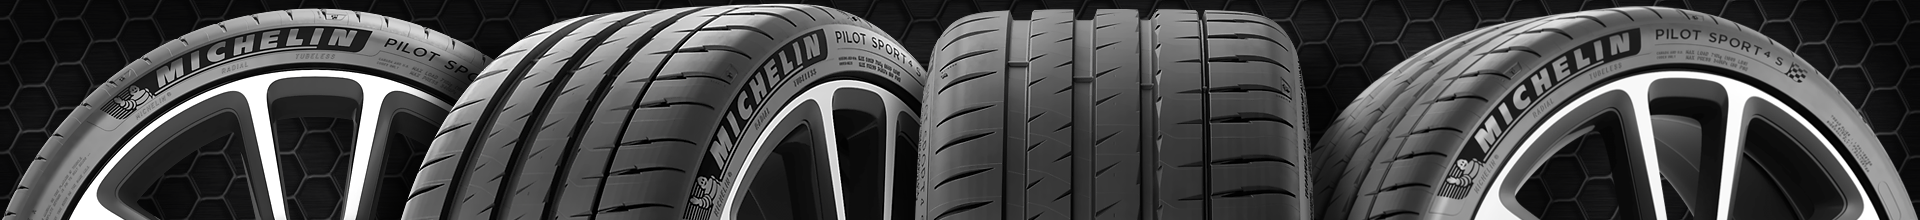 265 45 18 discount tires from Tire Outlet US